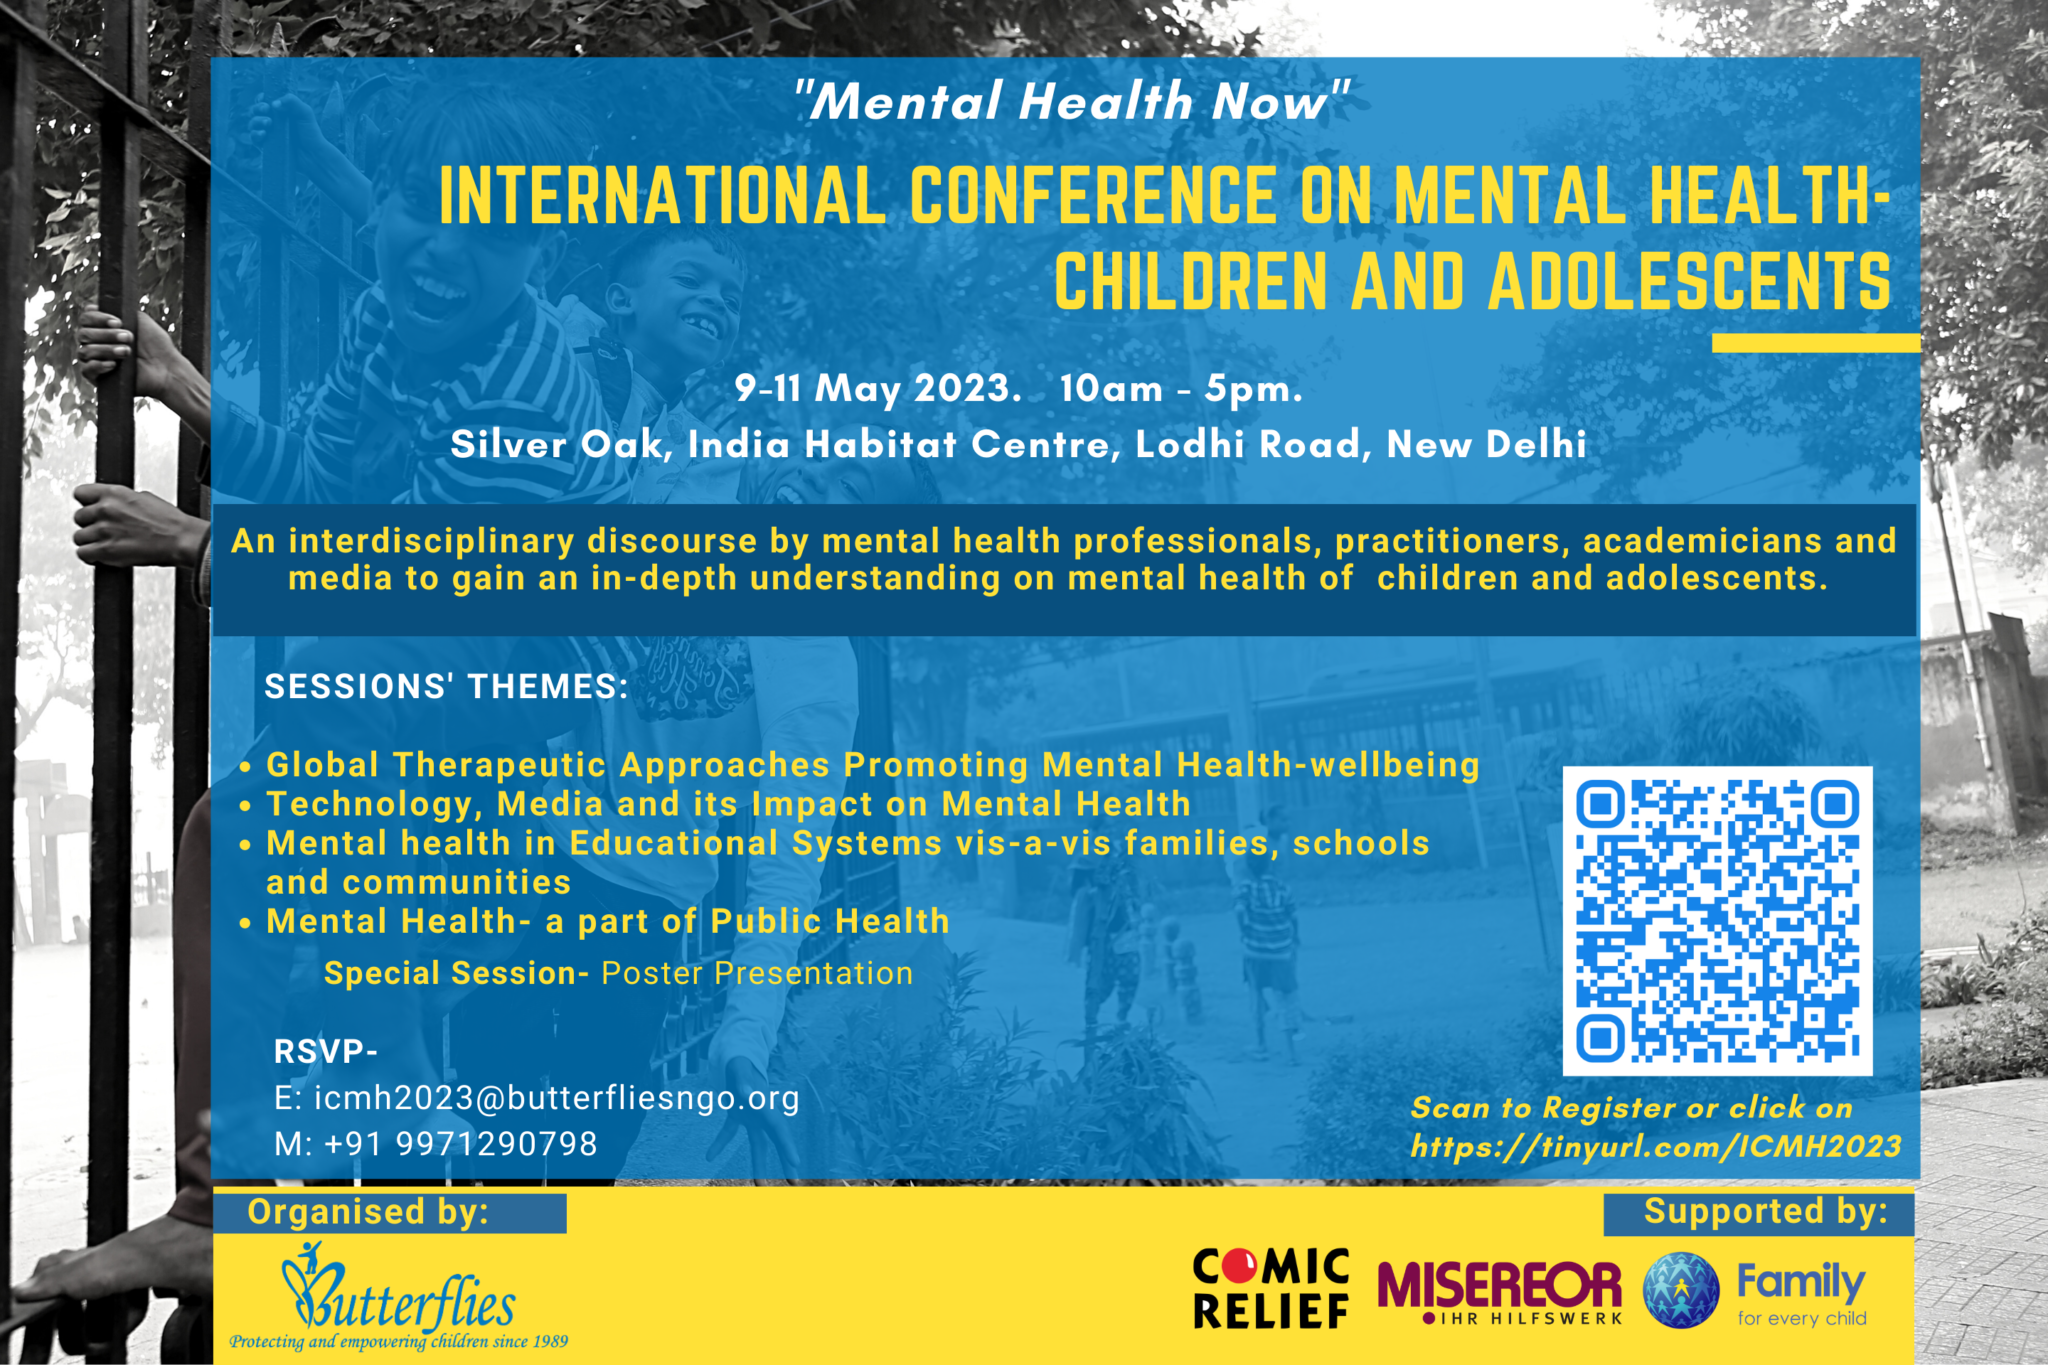 International Conference on Mental Health - Children and Adolescents